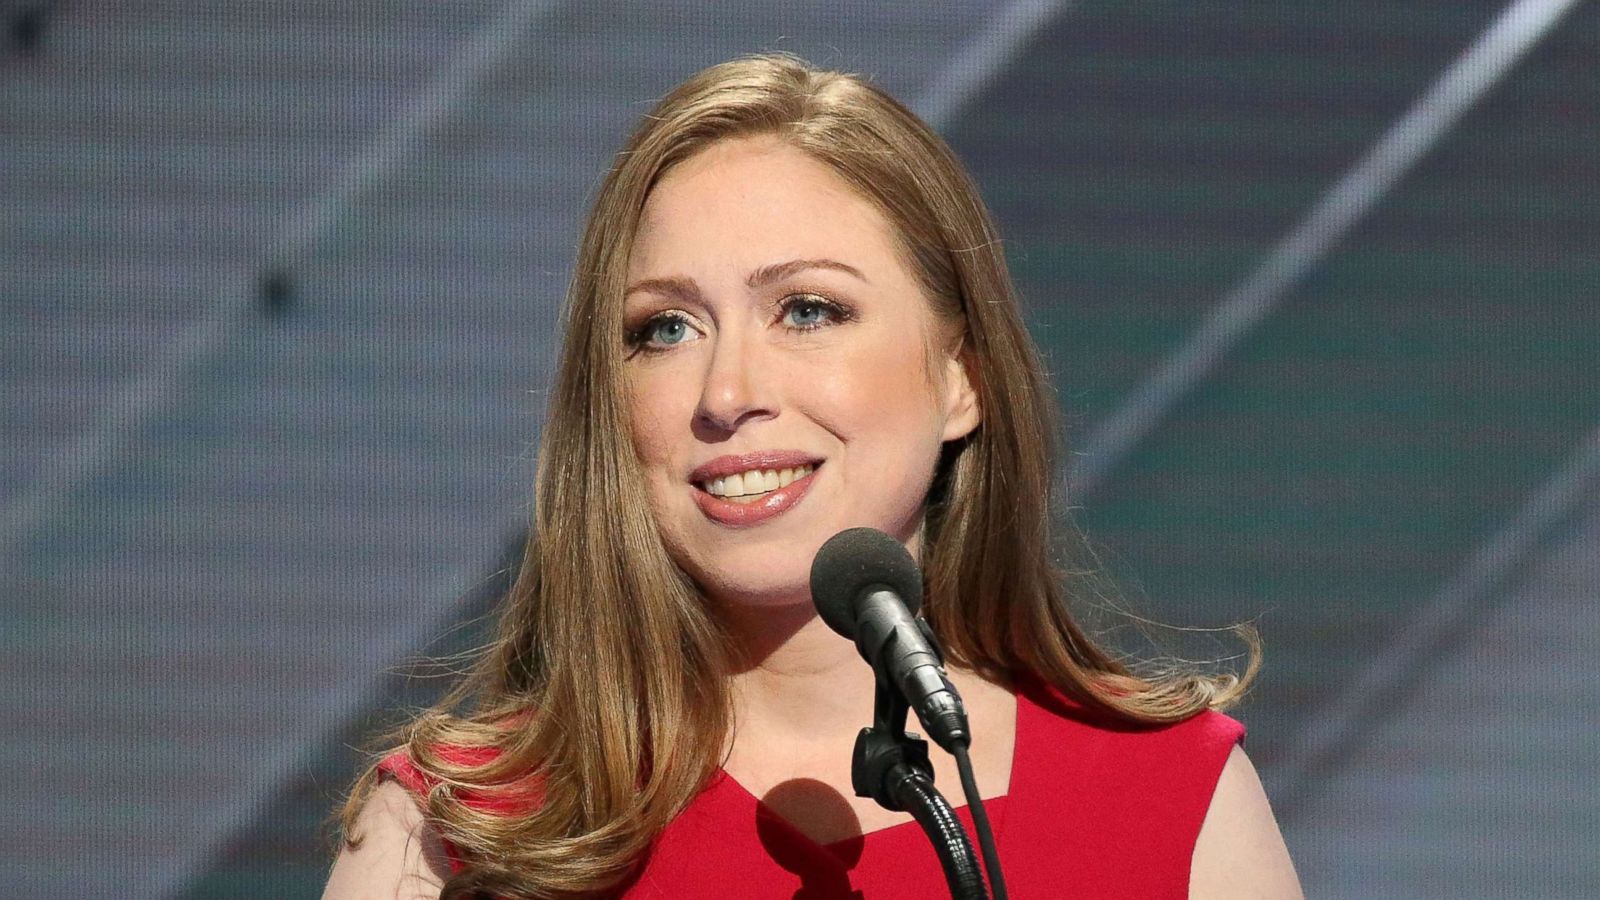 Chelsea Clinton calls out National Enquirer for attacks against her mother  - ABC News